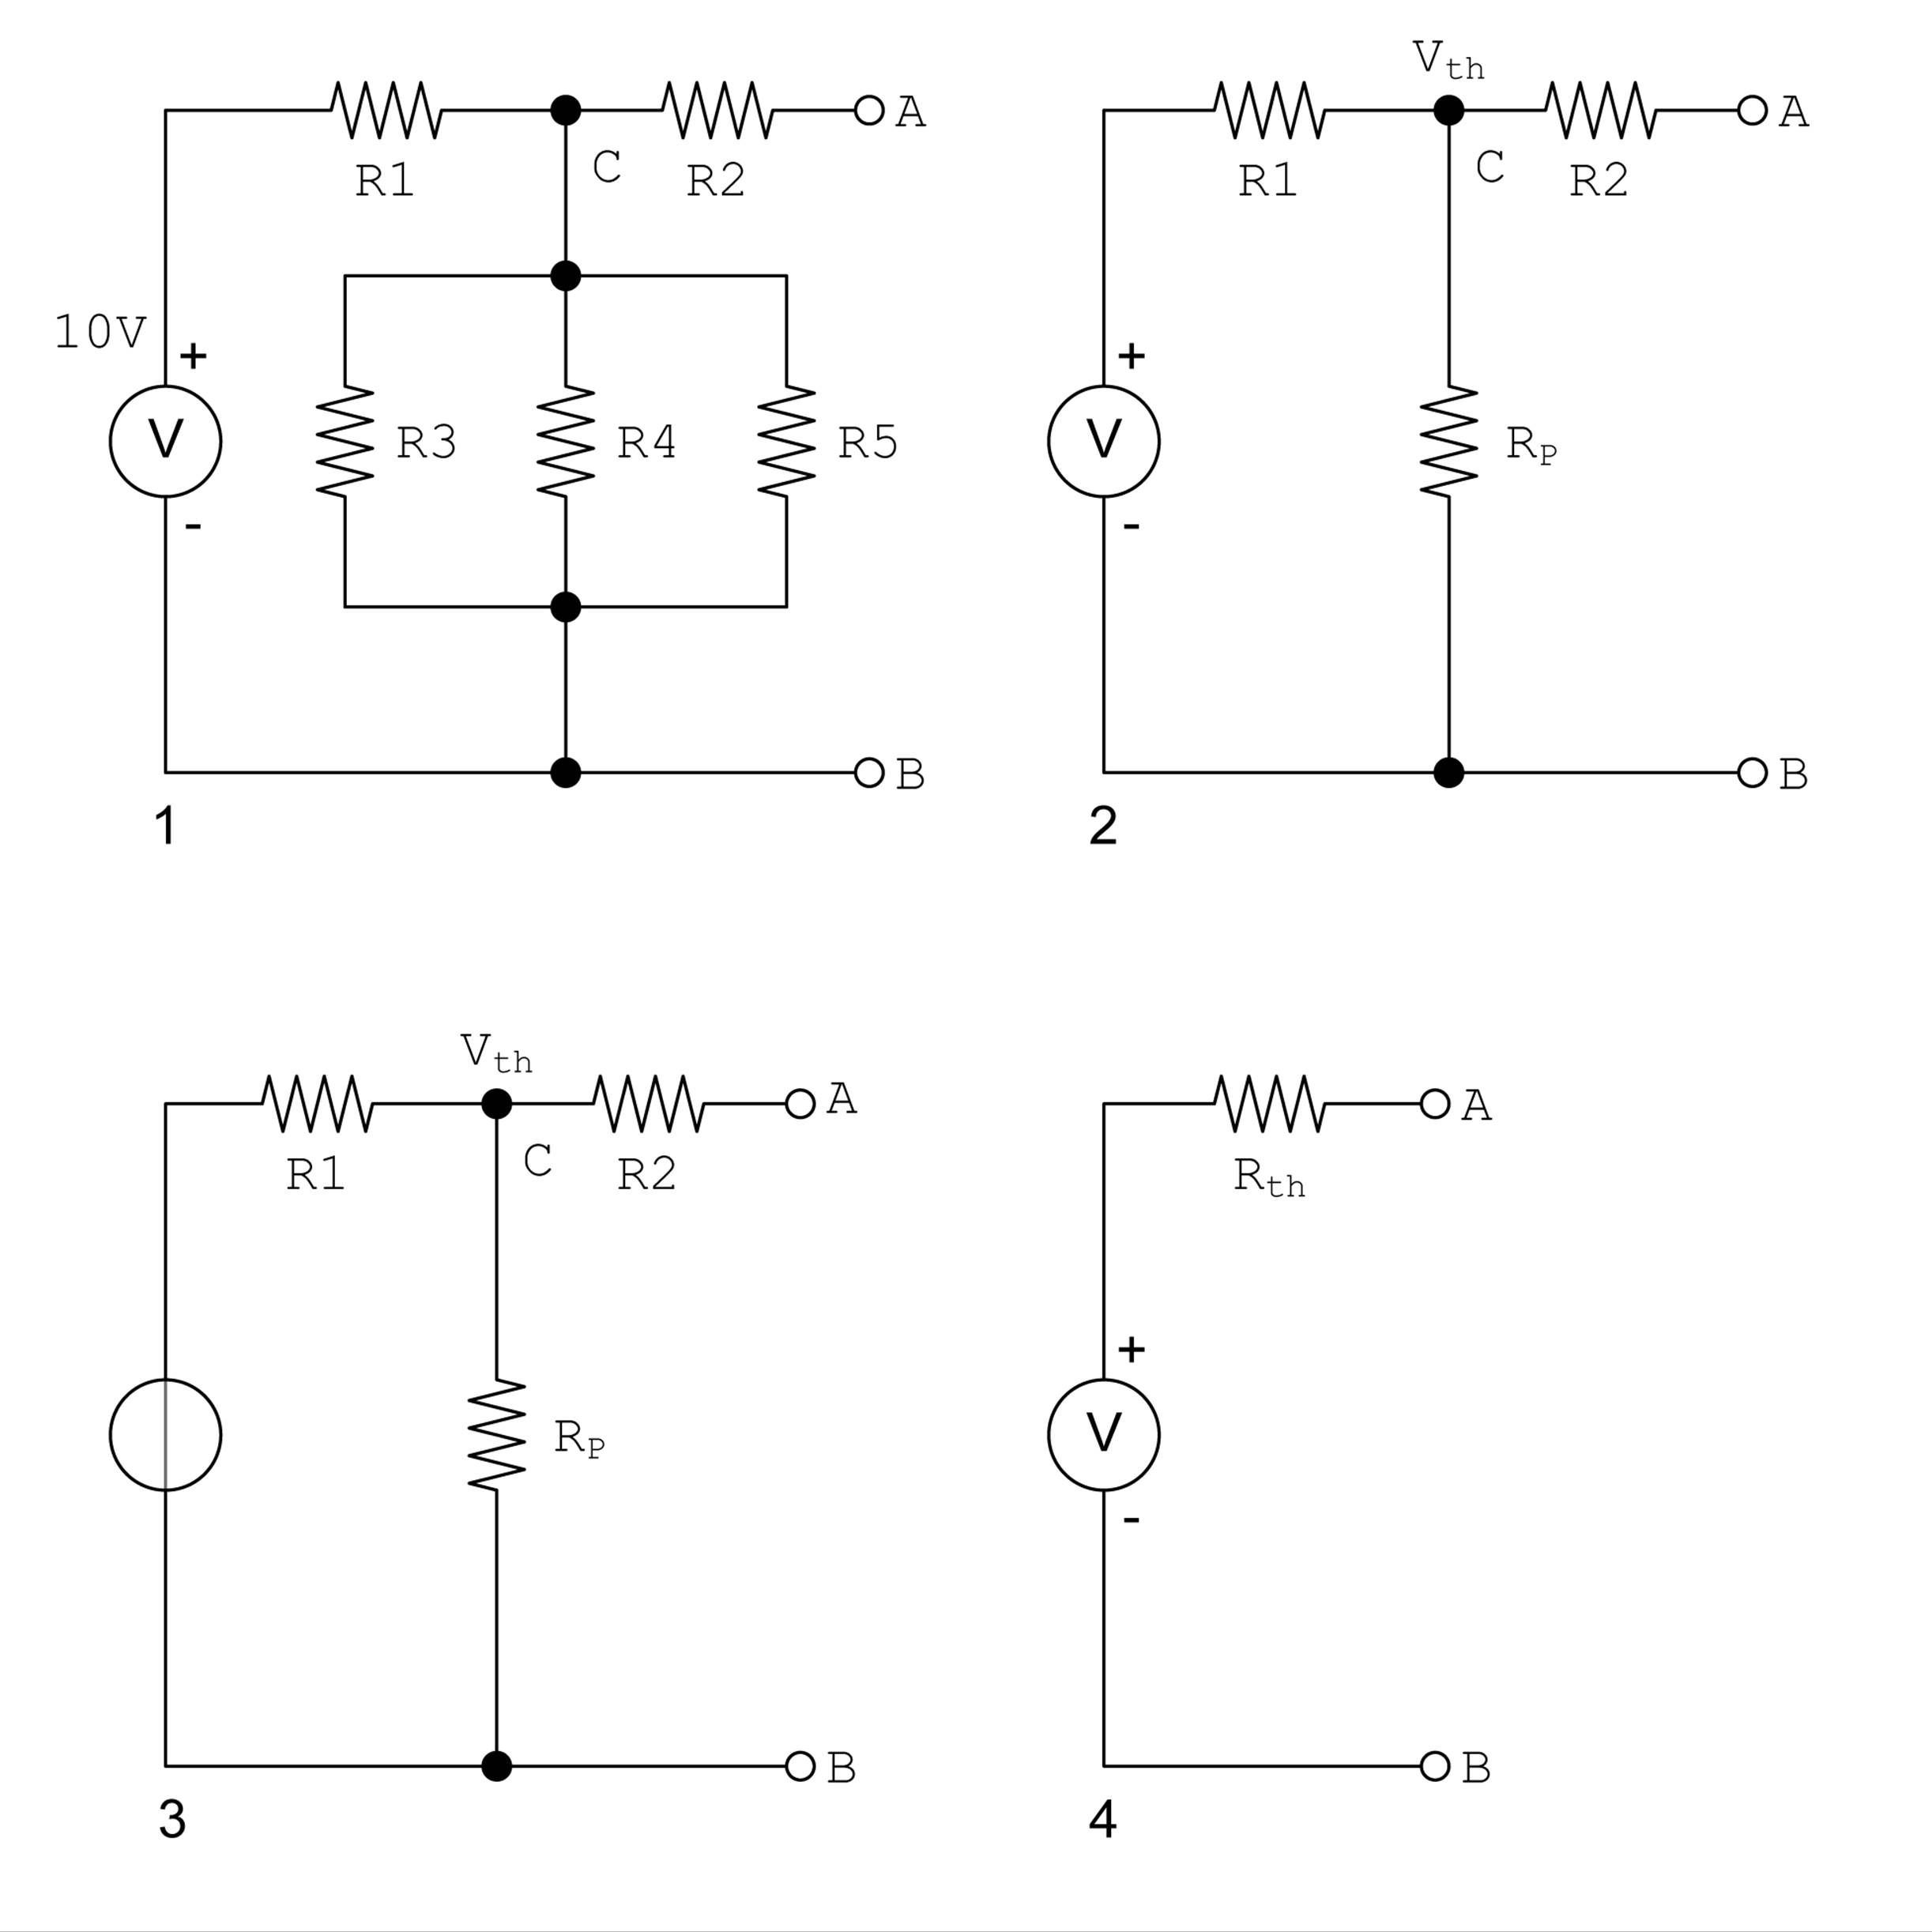 Thévenin equivalent circuit example with single V source